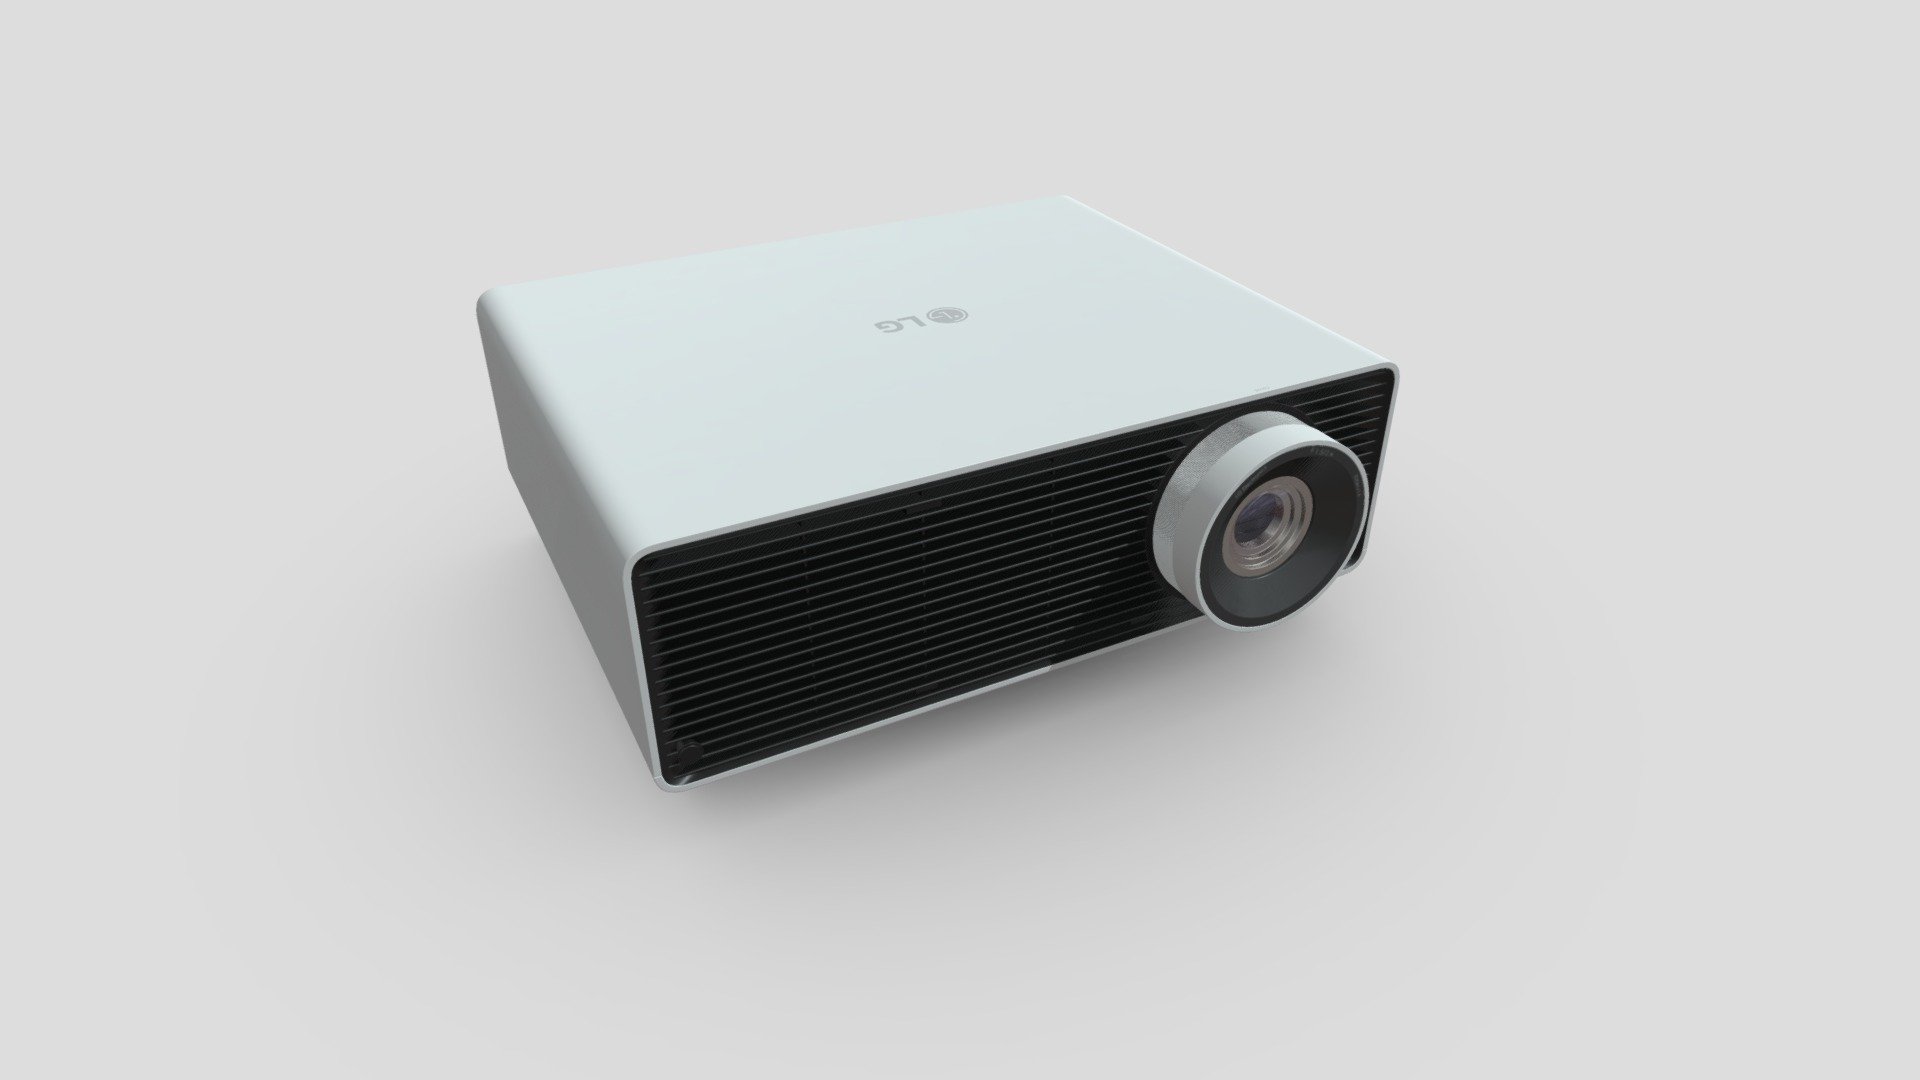 The BU50NST's small size—12.8 x 14.6 x 6.1 inches (HWD)

3d model of a Laser ProBeam BF50NST 4K Video Projector by LG .
Best use for adding detail on your Architectural Visualization or Interior Design.
This product is made in Blender and ready to render in Cycle. Unit setup is metres and the models are scaled to match real life objects.
The model comes with textures and materials and is positioned in the center of the coordinates system.
No additional plugin is needed to open the model.

Notes:

Geometry: Polygonal

Textures: Yes

Rigged: No

Animated: No

UV Mapped: Yes

Unwrapped UVs: Yes, non-overlapping

Bake all map

Hope you like it! Thank you!

My youtube channel : https://www.youtube.com/toss90 - Laser ProBeam BF50NST 4K Video Projector by LG - Buy Royalty Free 3D model by Toss90 3d model